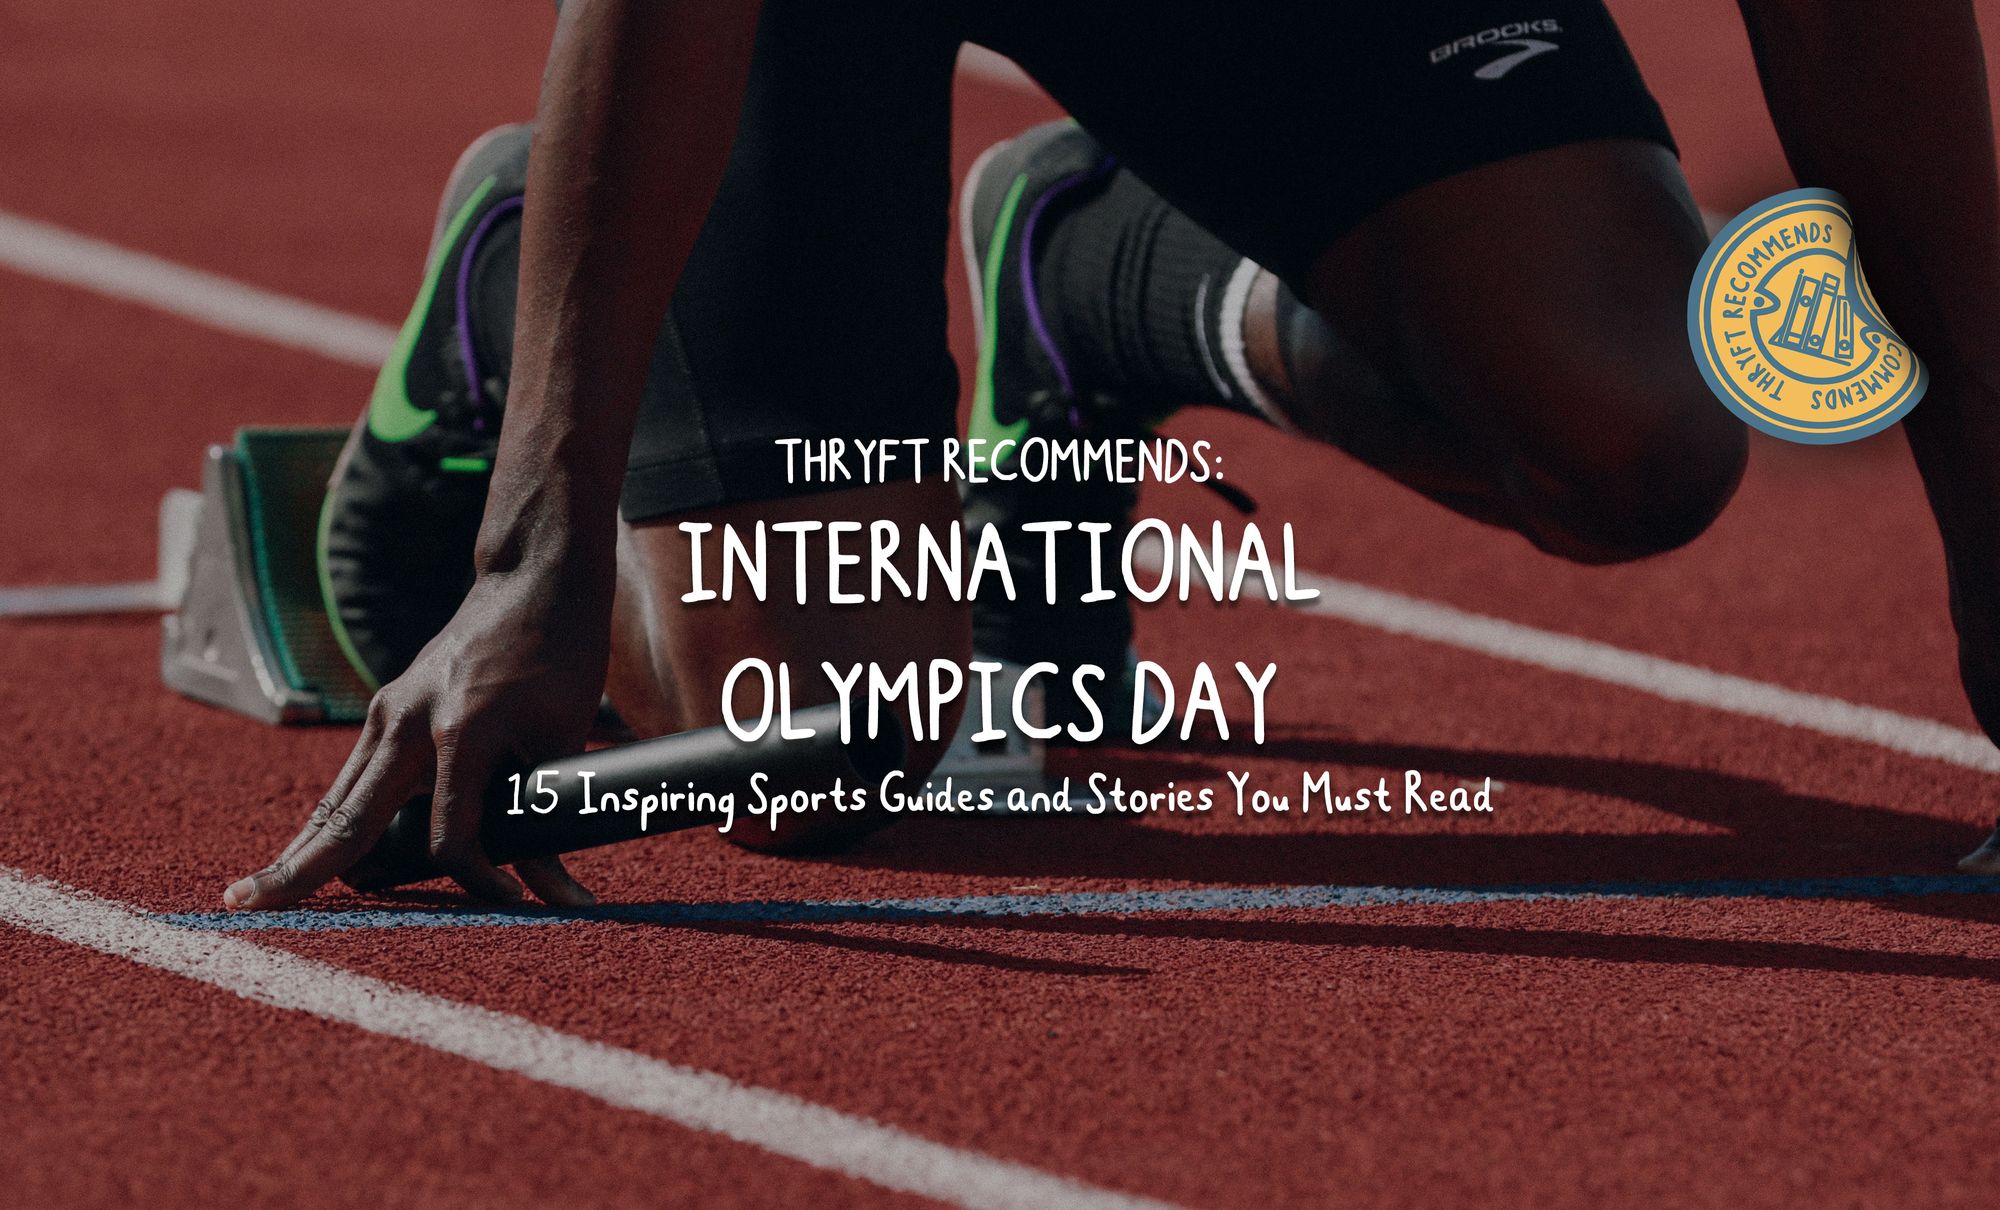 International Olympics Day: 15 Inspiring Sports Guides and Stories You Must Read